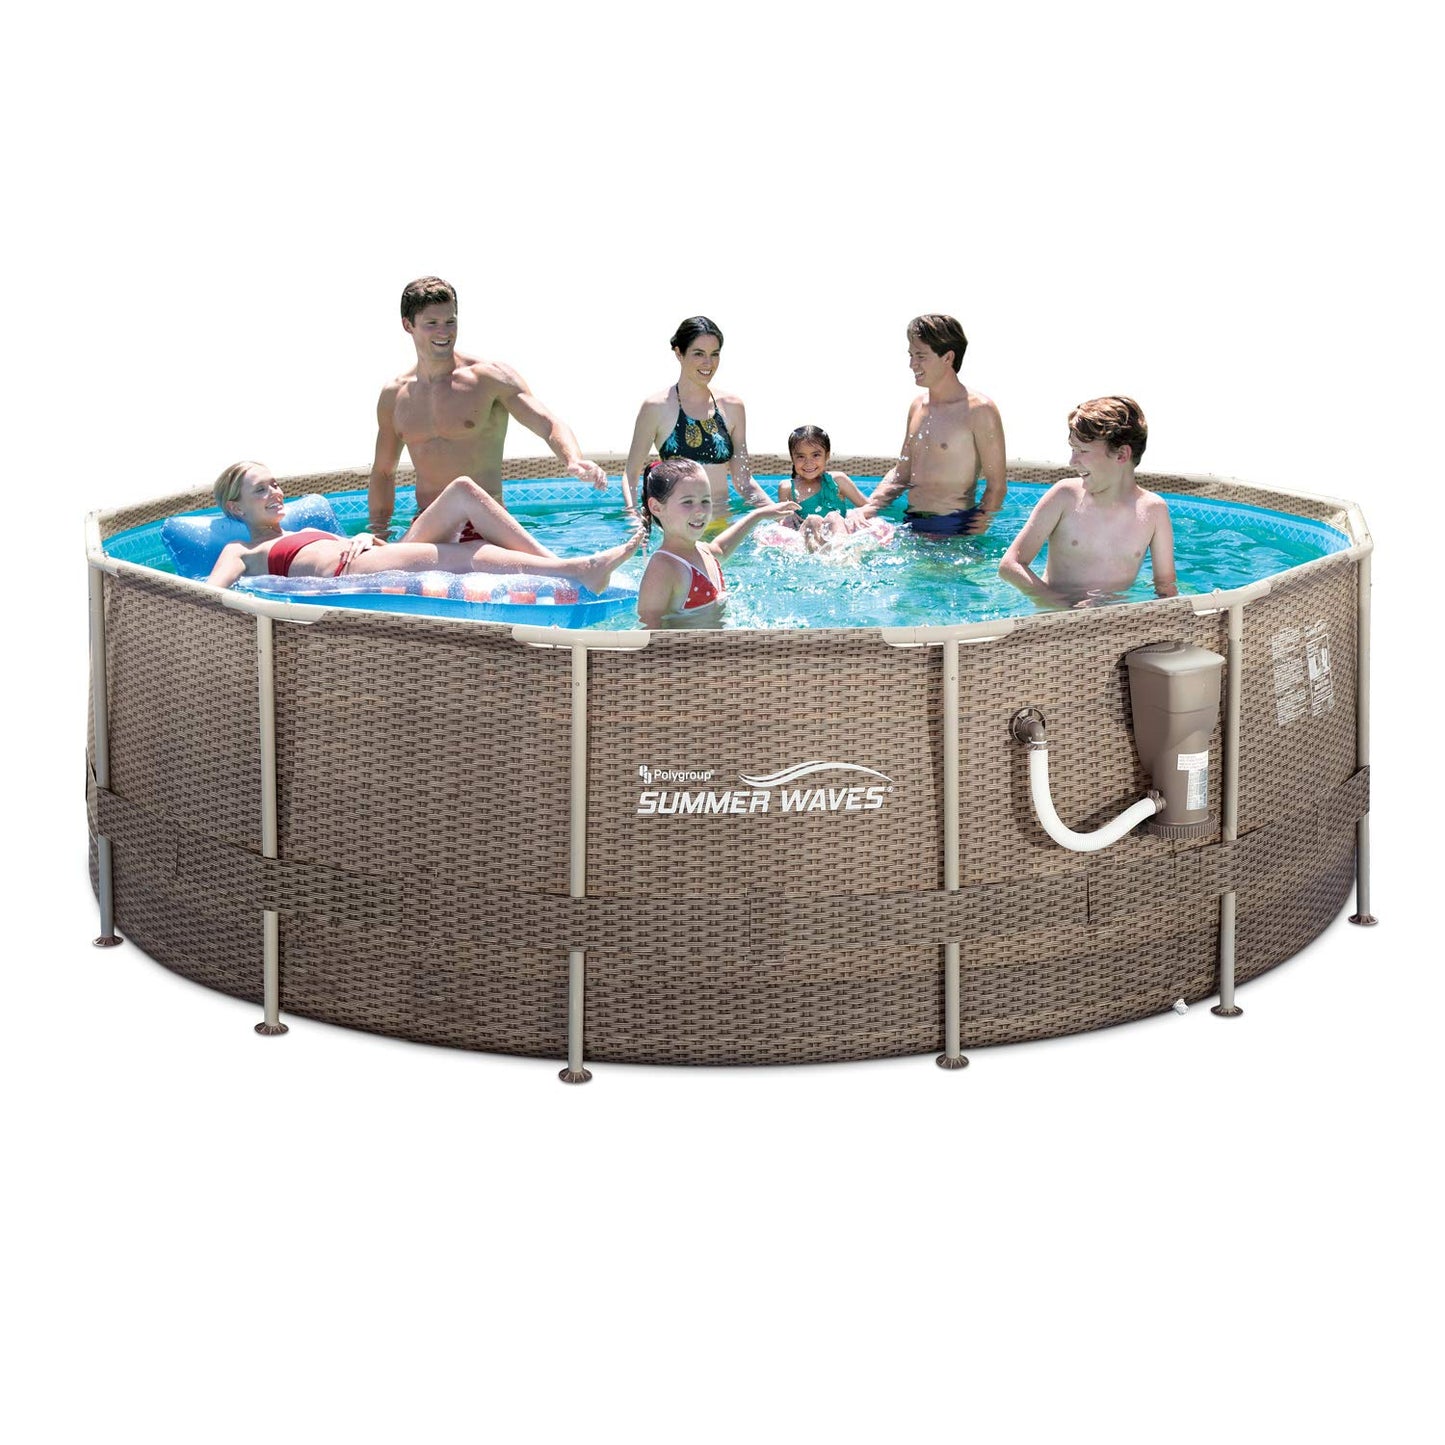 Summer Waves P20014482 14ft x 48in Outdoor Round Frame Above Ground Swimming Pool Set with Skimmer Filter Pump, Filter Cartridge, and Ladder, Brown Light Wicker/Sand